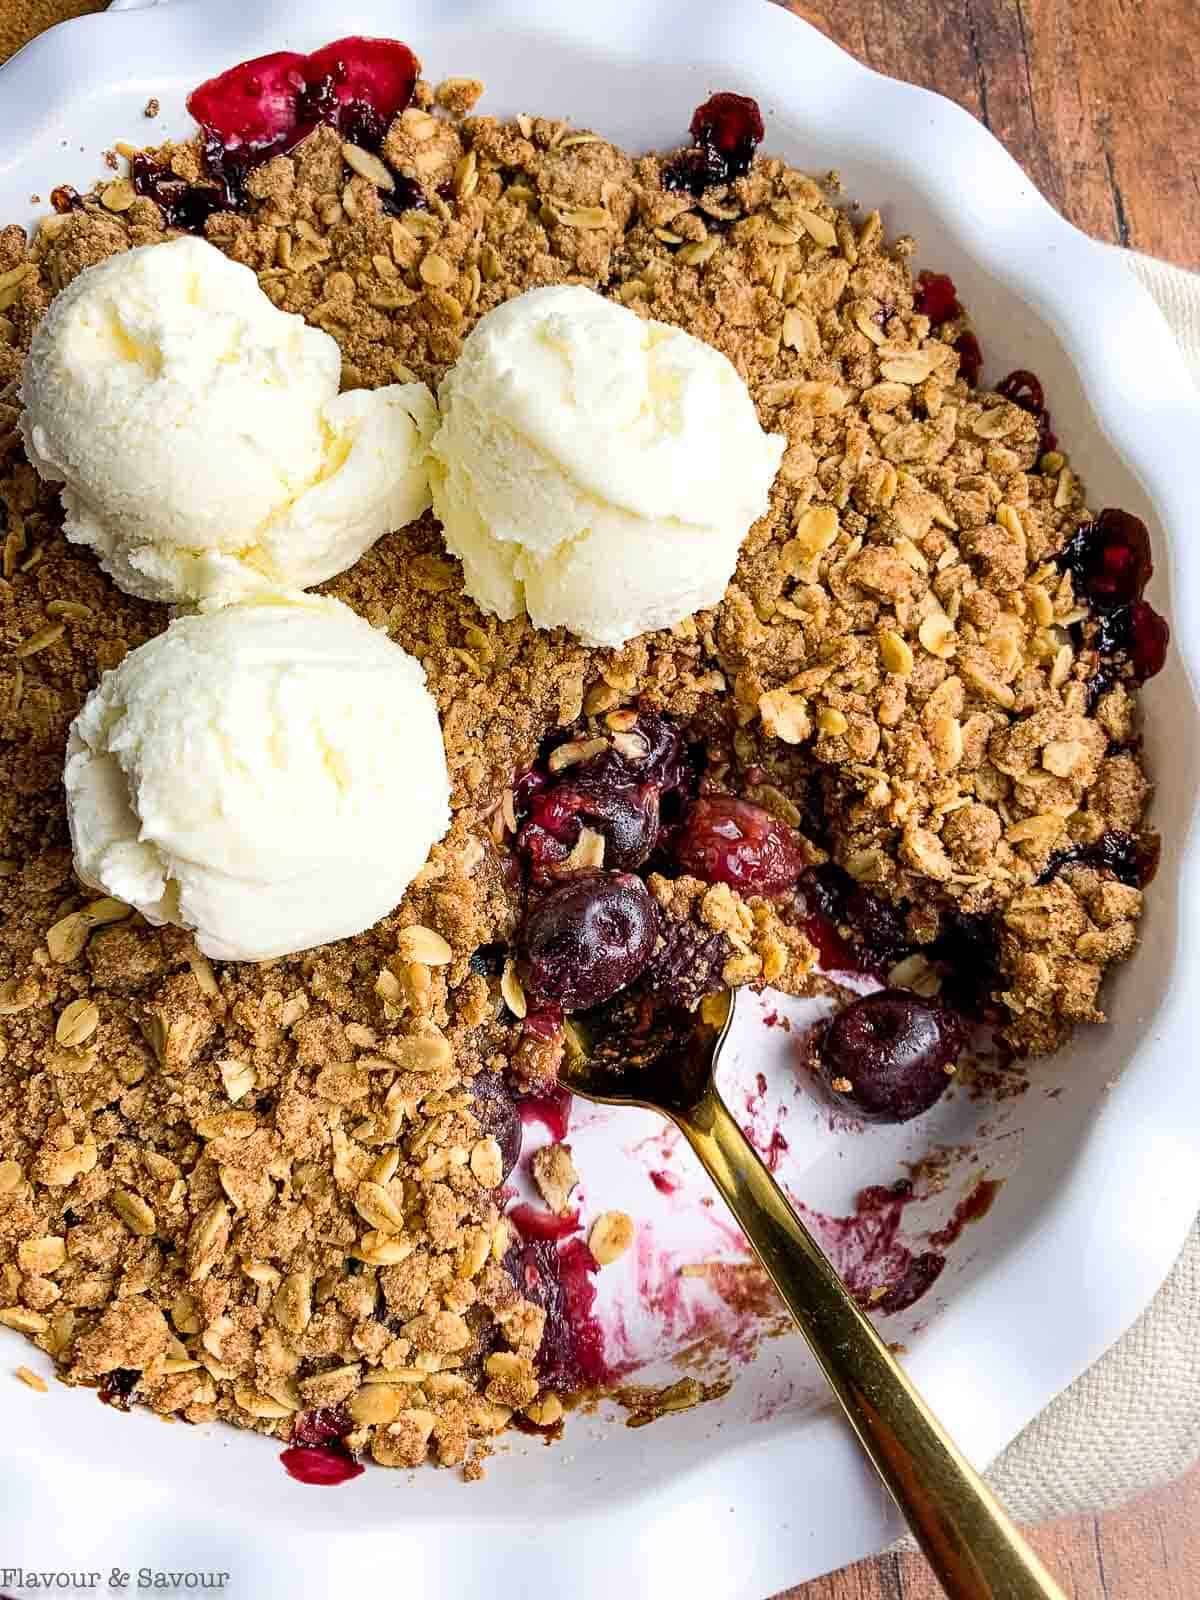 Overhead view of a baking dish with cherry crisp and ice cream.